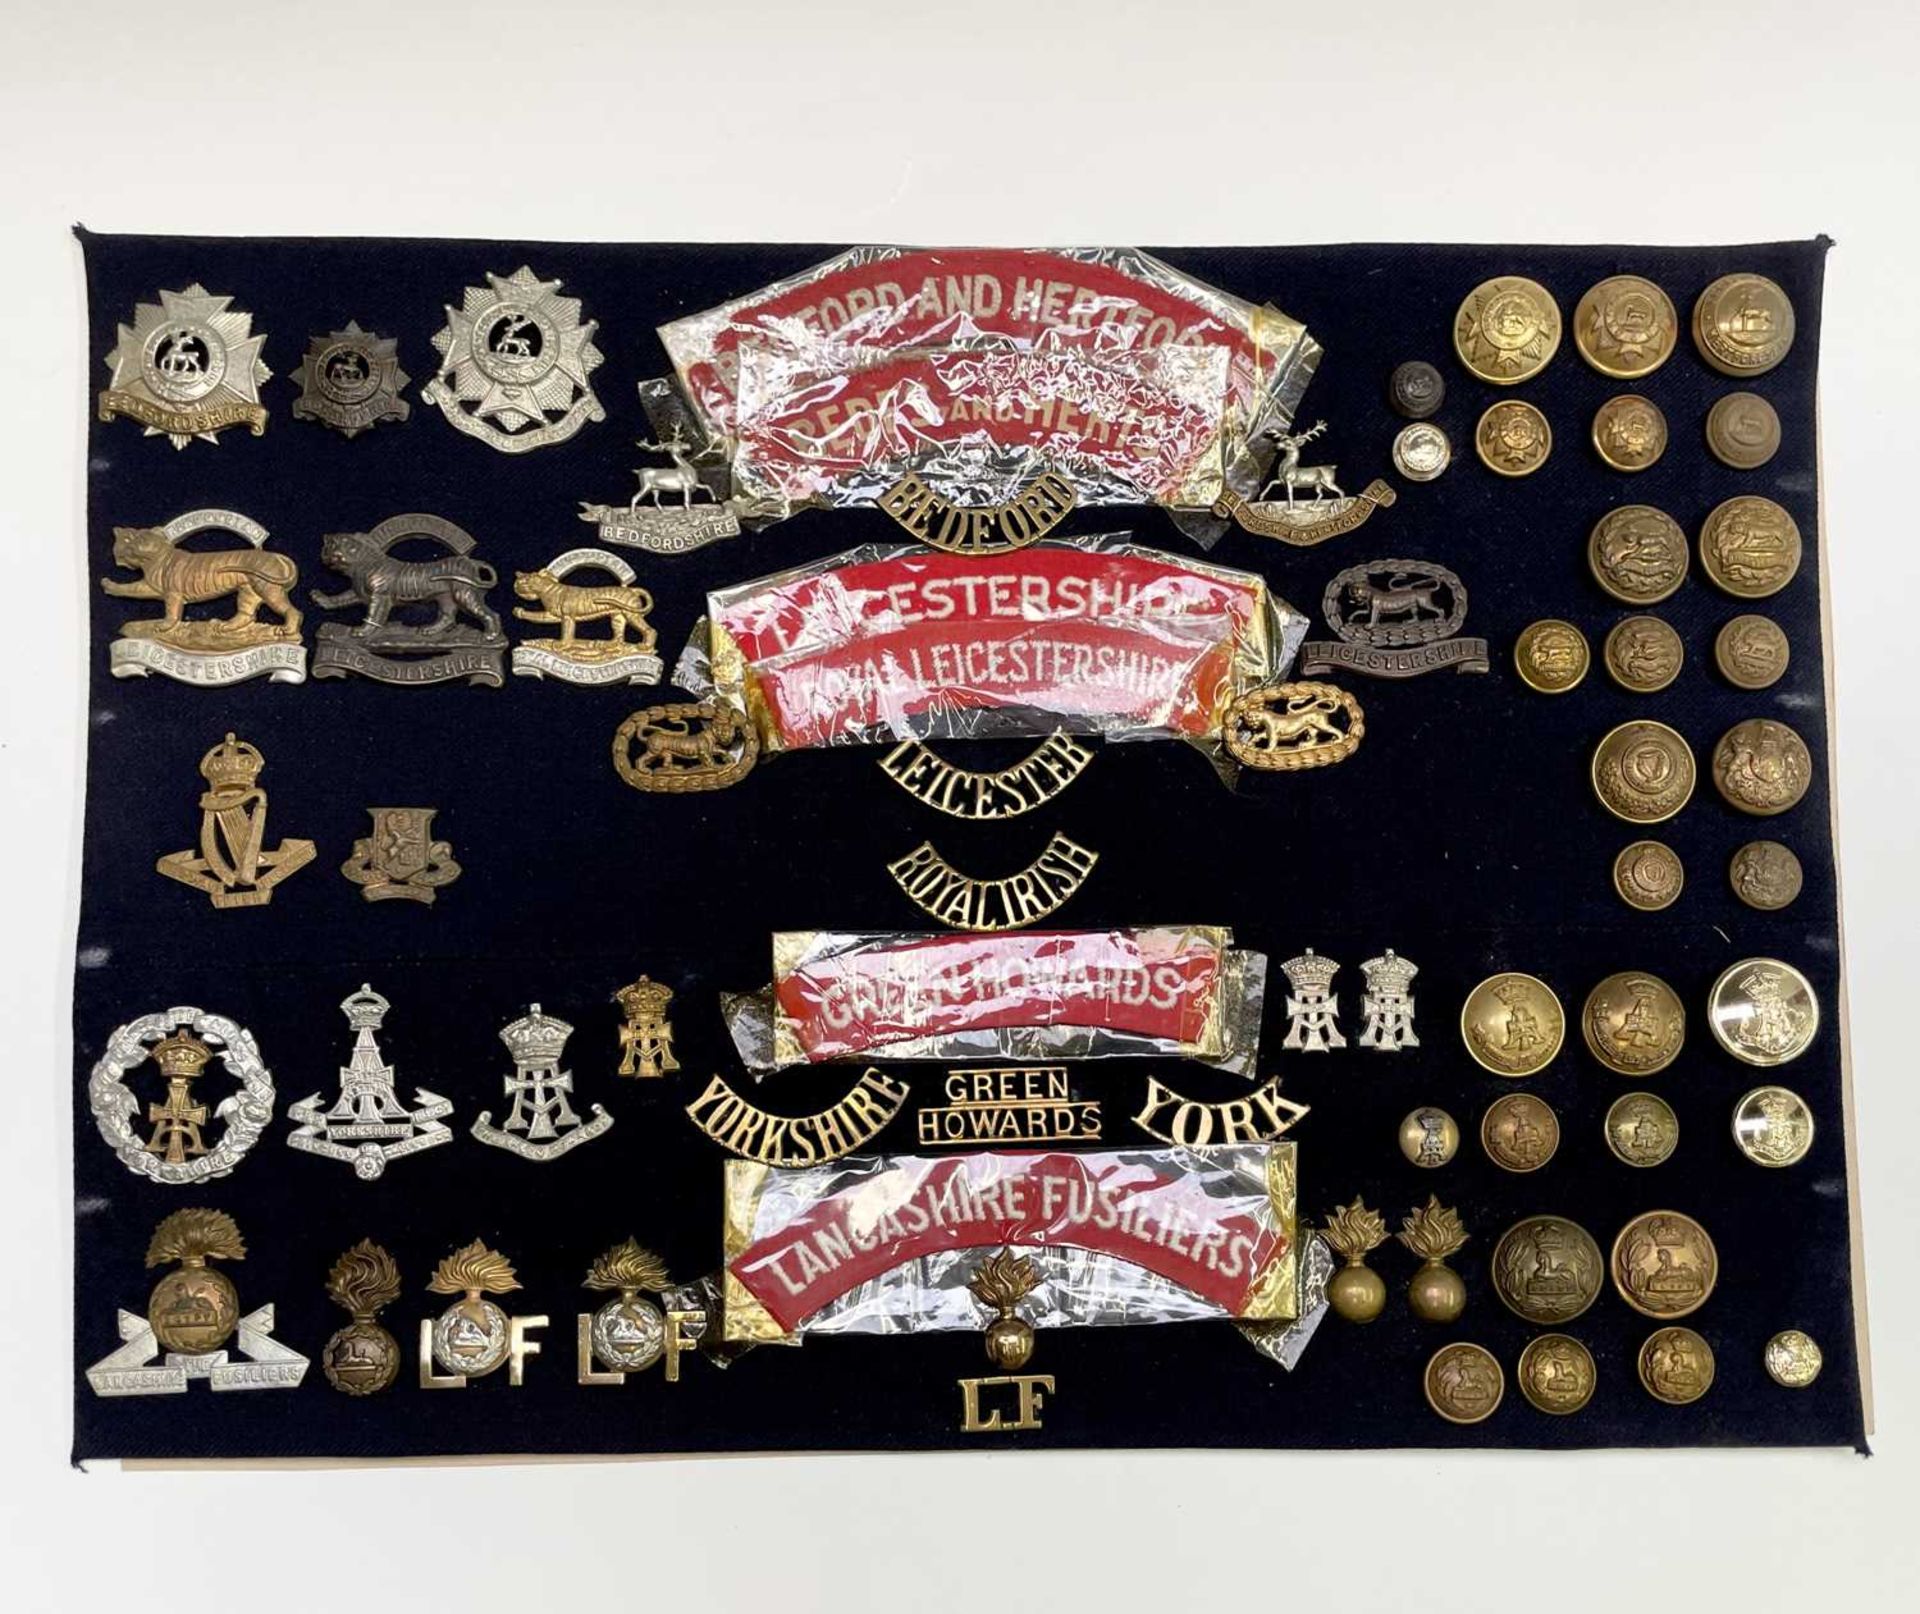 16th - 18th Foot. A display card containing cap badges, collar dogs, shoulder titles and buttons.